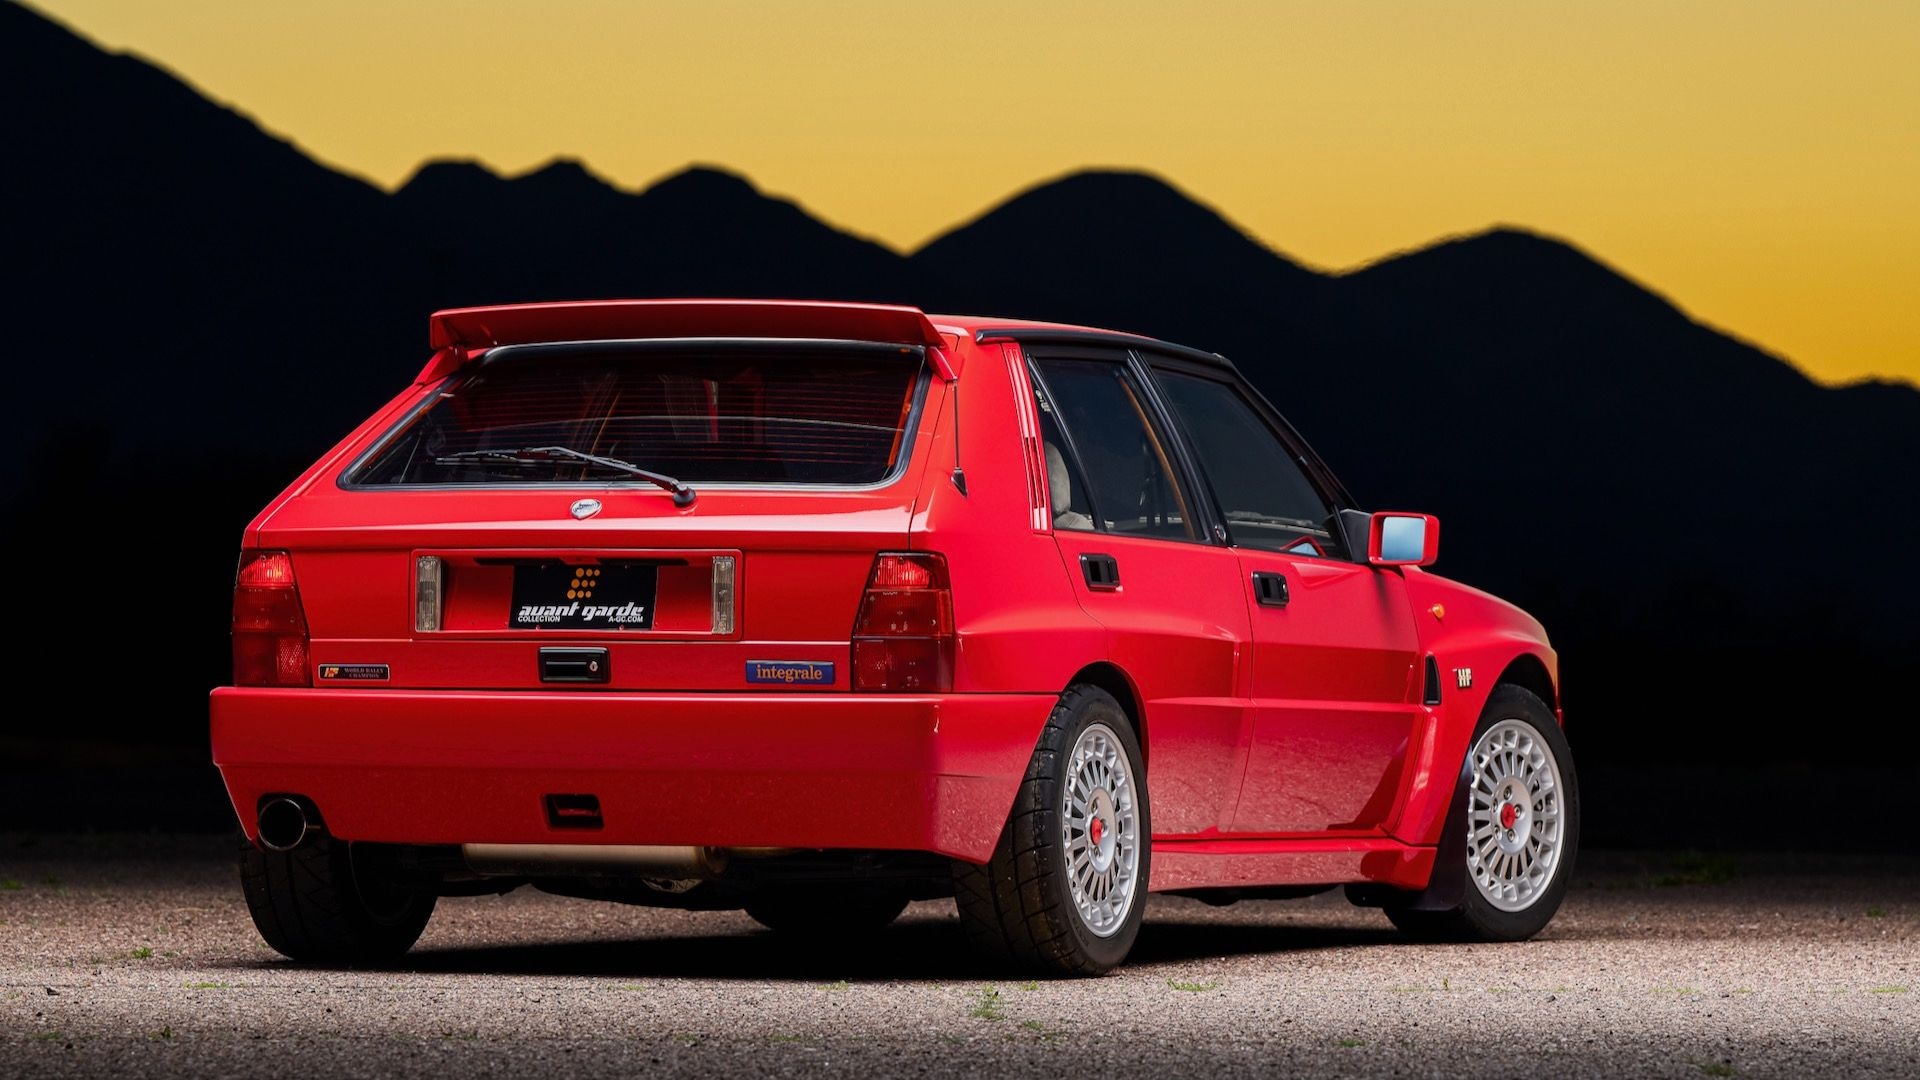 1992 Lancia Delta Integrale Evo 1 owned by Ralph Gilles (photo via Bring a Trailer)